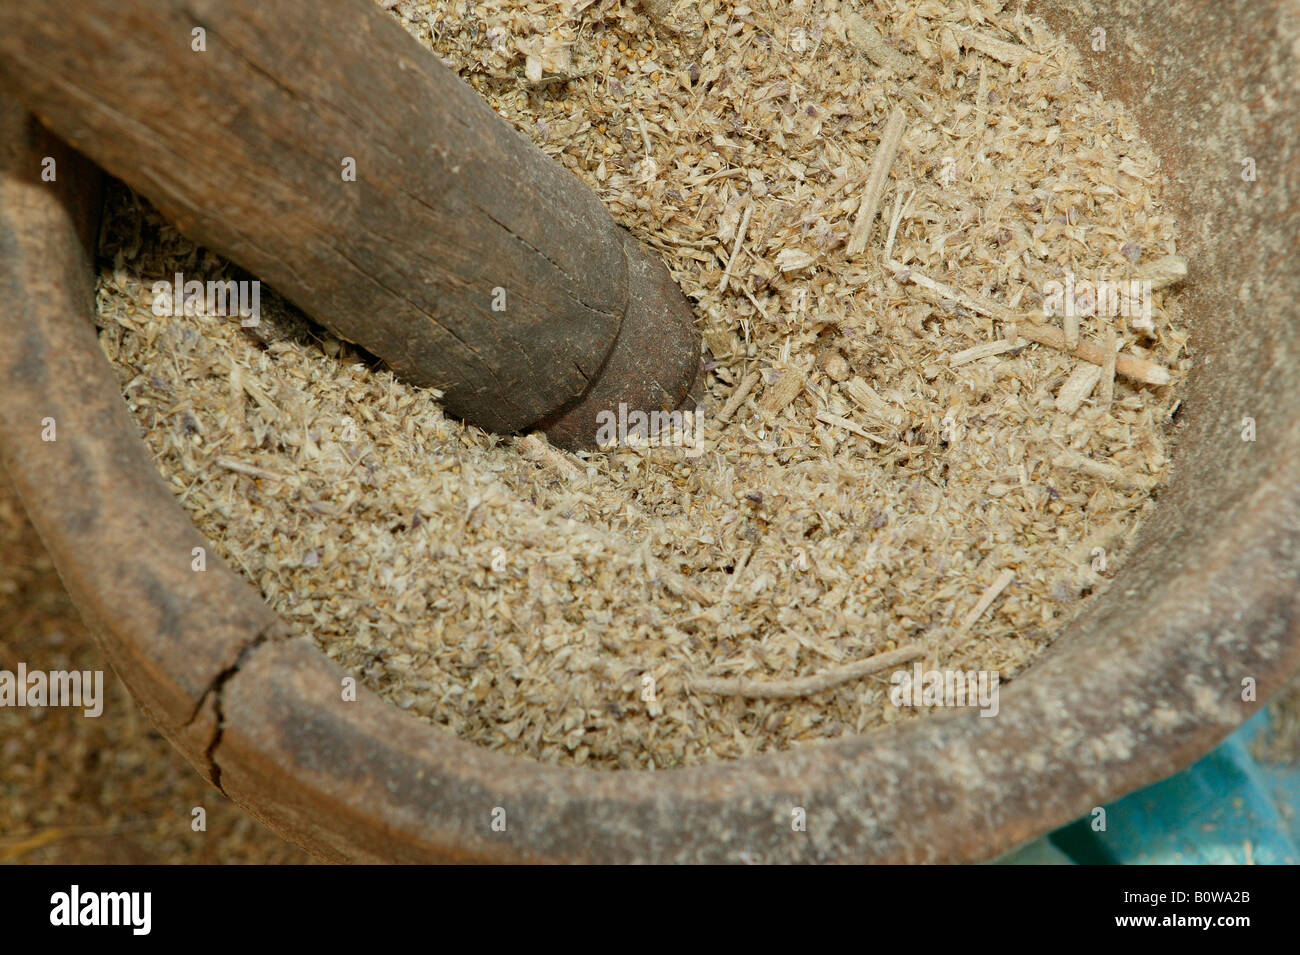 Millet, Houssere Faourou, Cameroon, Africa Stock Photo